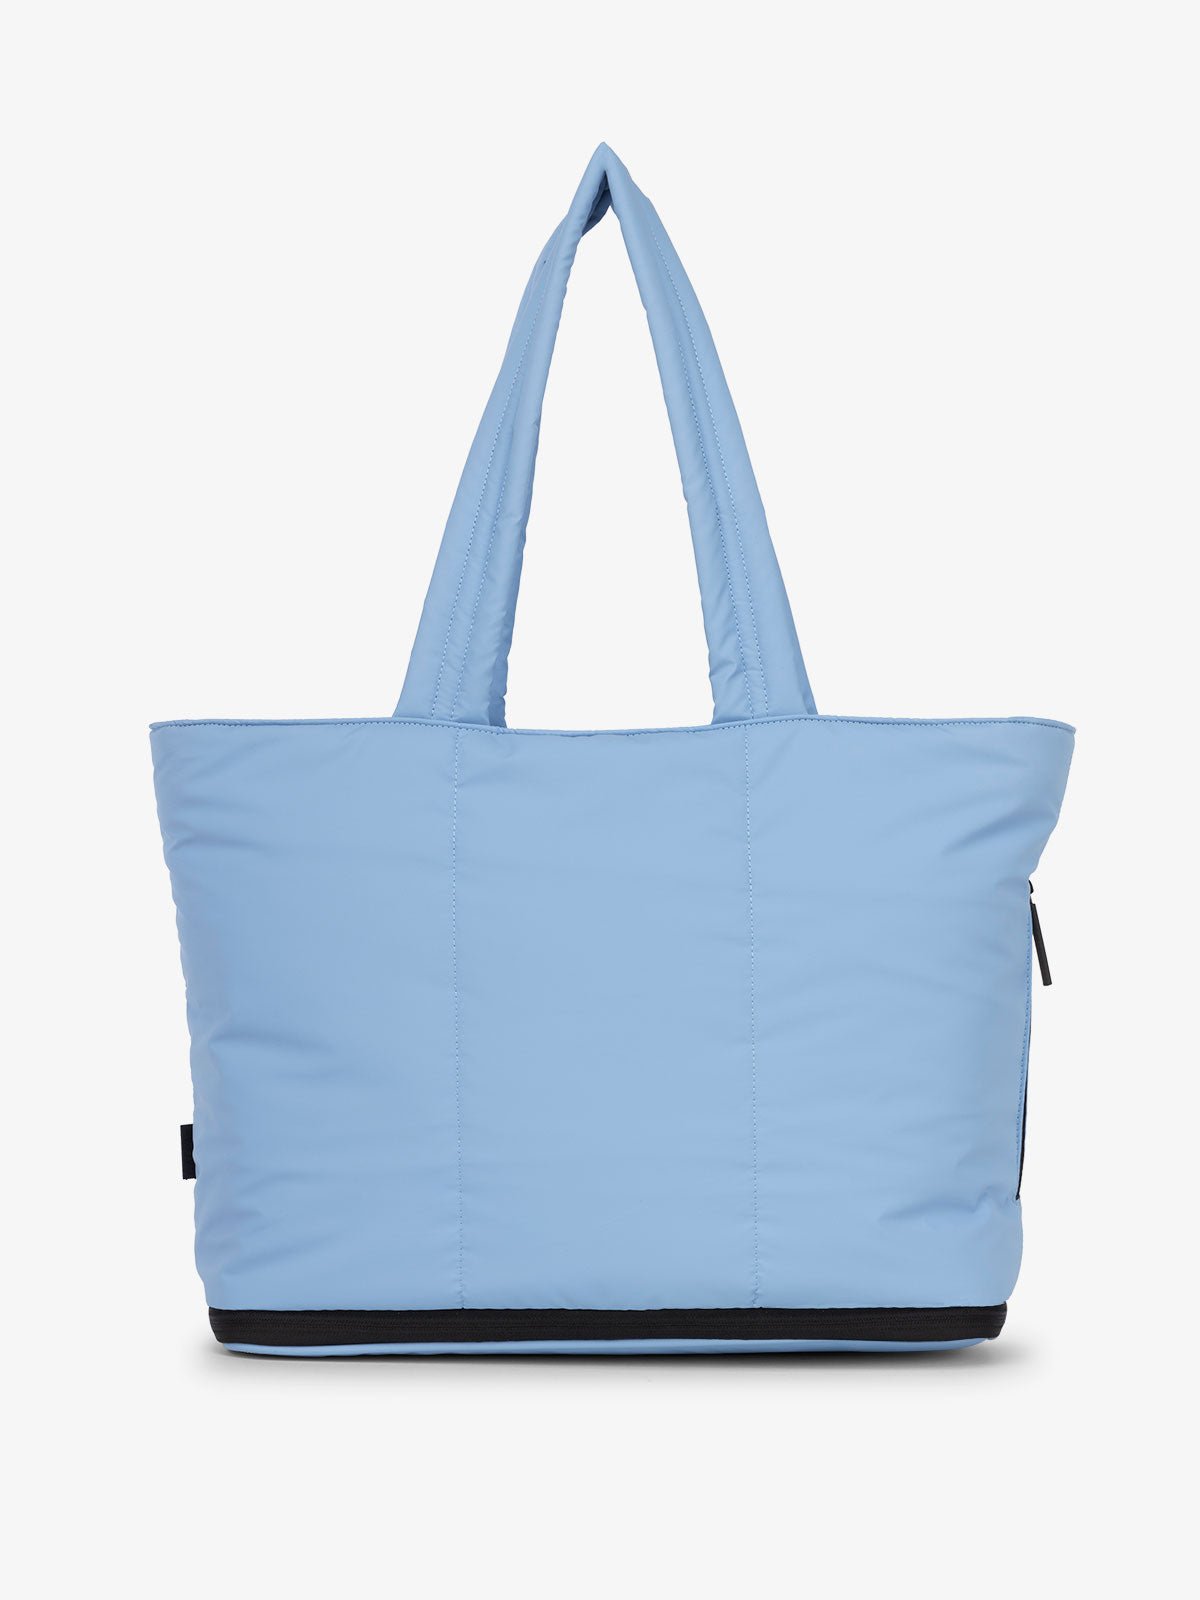 CALPAK Luka expandable laptop tote bag with dual shoulder straps in winter sky